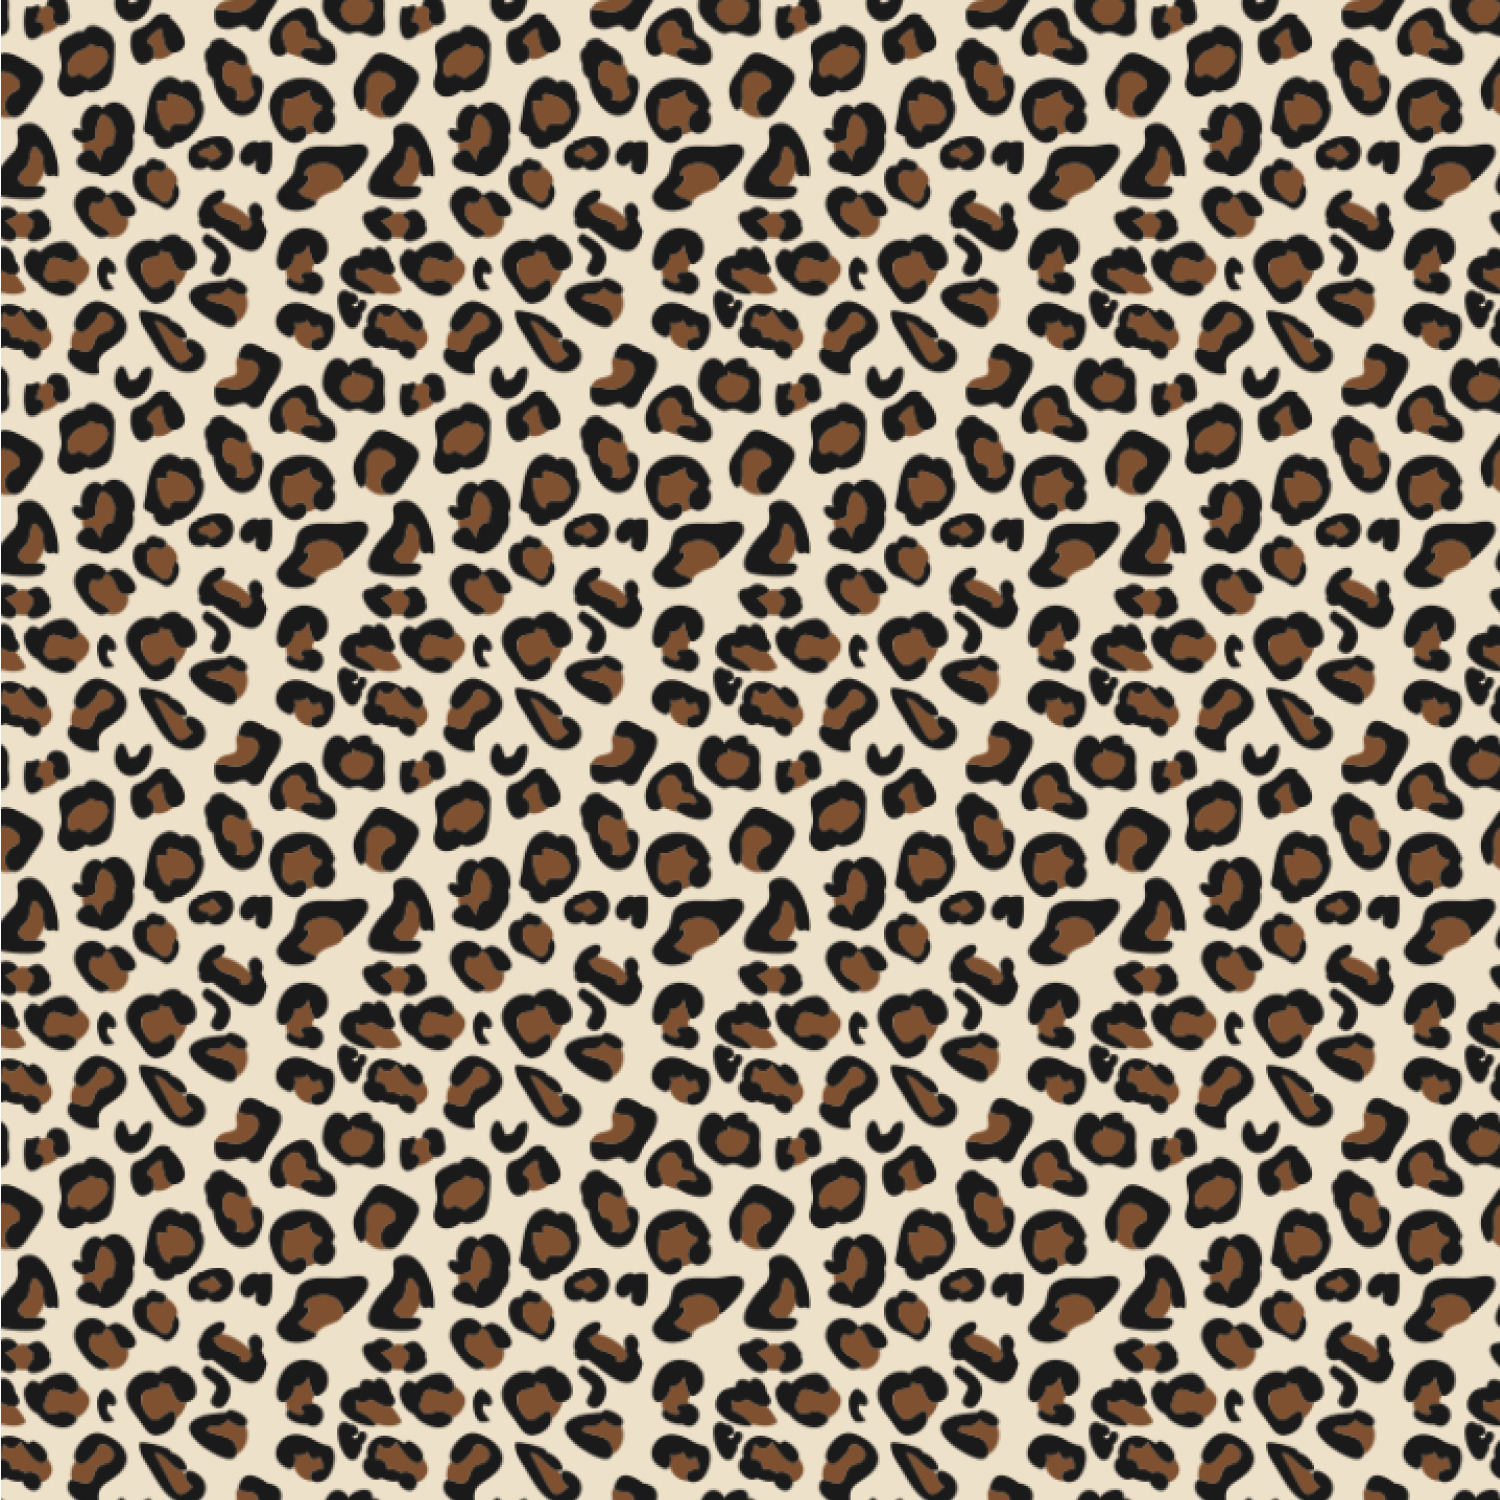 Custom Leopard Print Wallpaper & Surface Covering | YouCustomizeIt